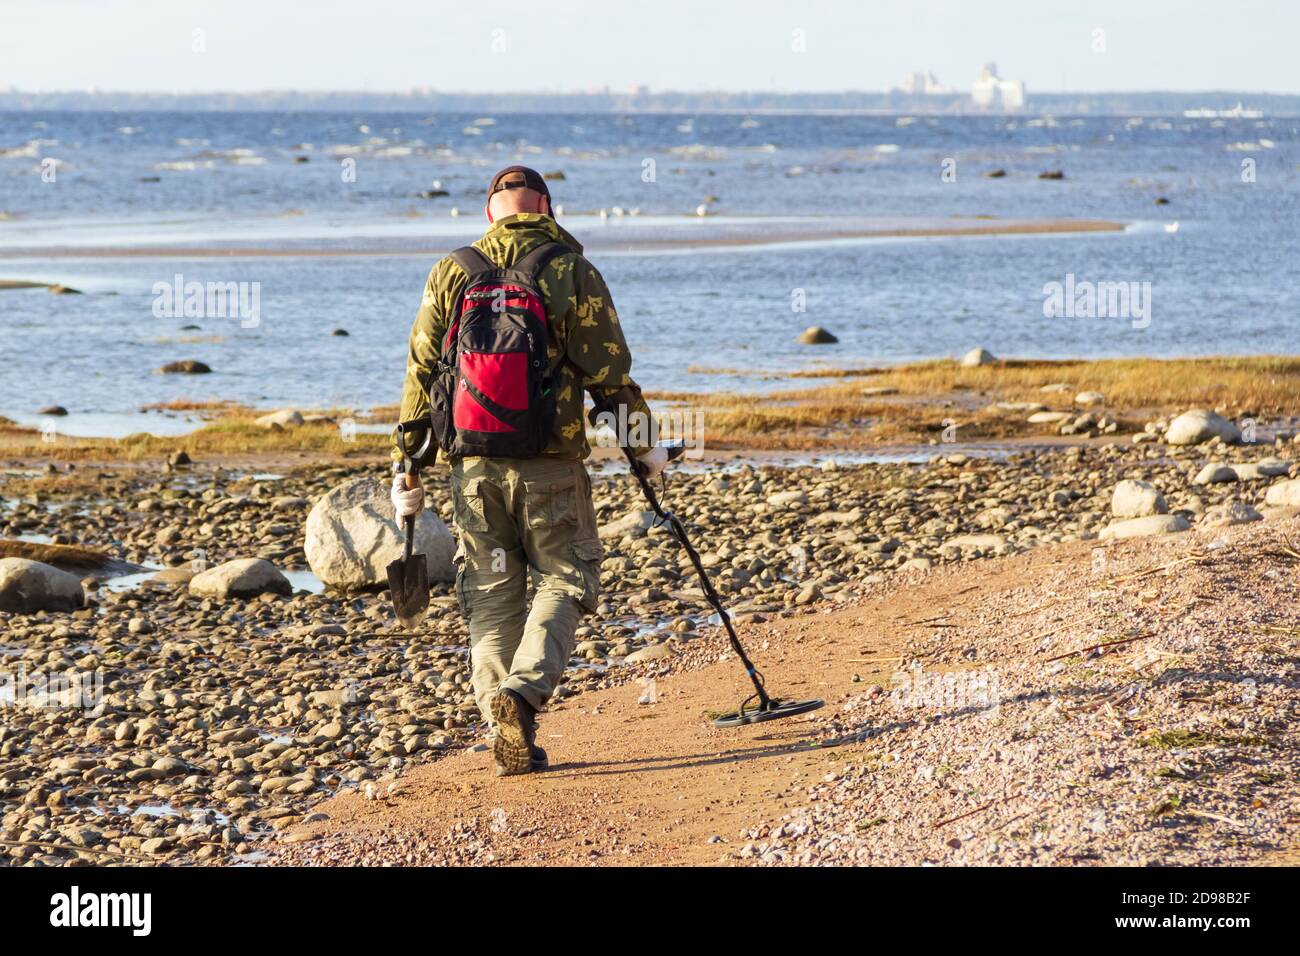 A treasure hunter with a metal detector walks along the sandy deserted beach in search of lost coins and jewelry. Stock Photo